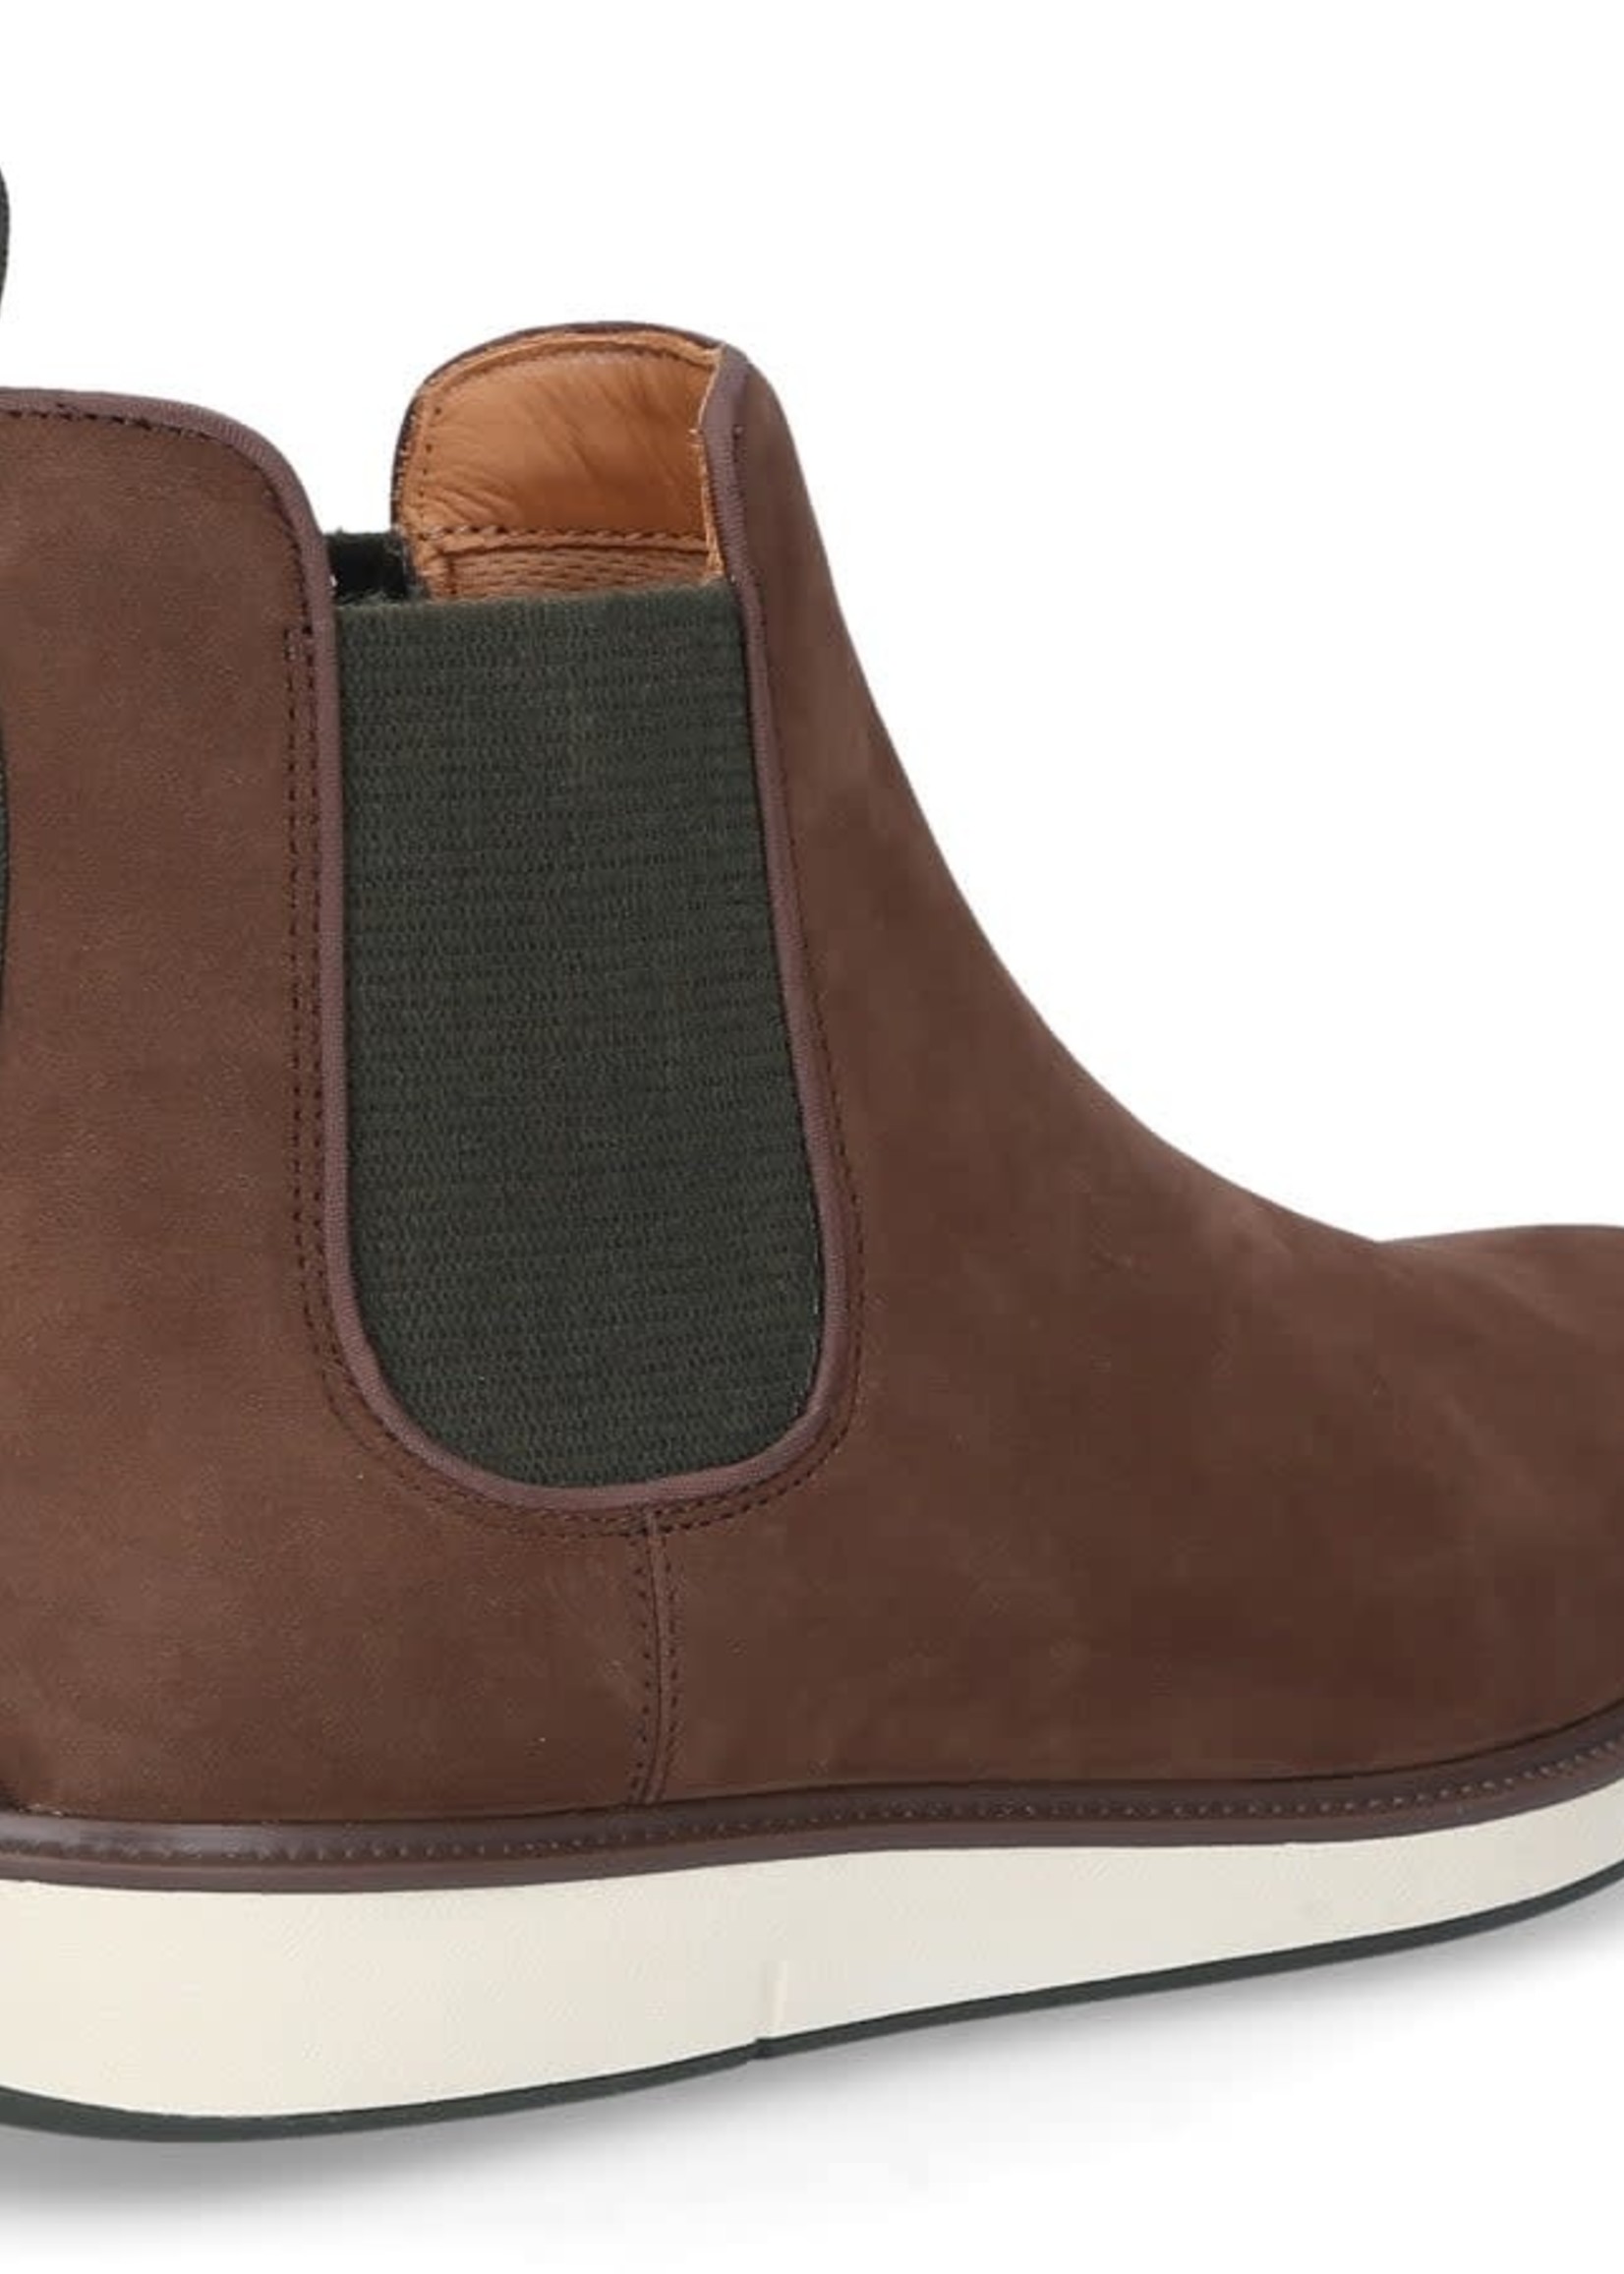 SWIMS MOTION CHELSEA BOOTS - 212-98 -